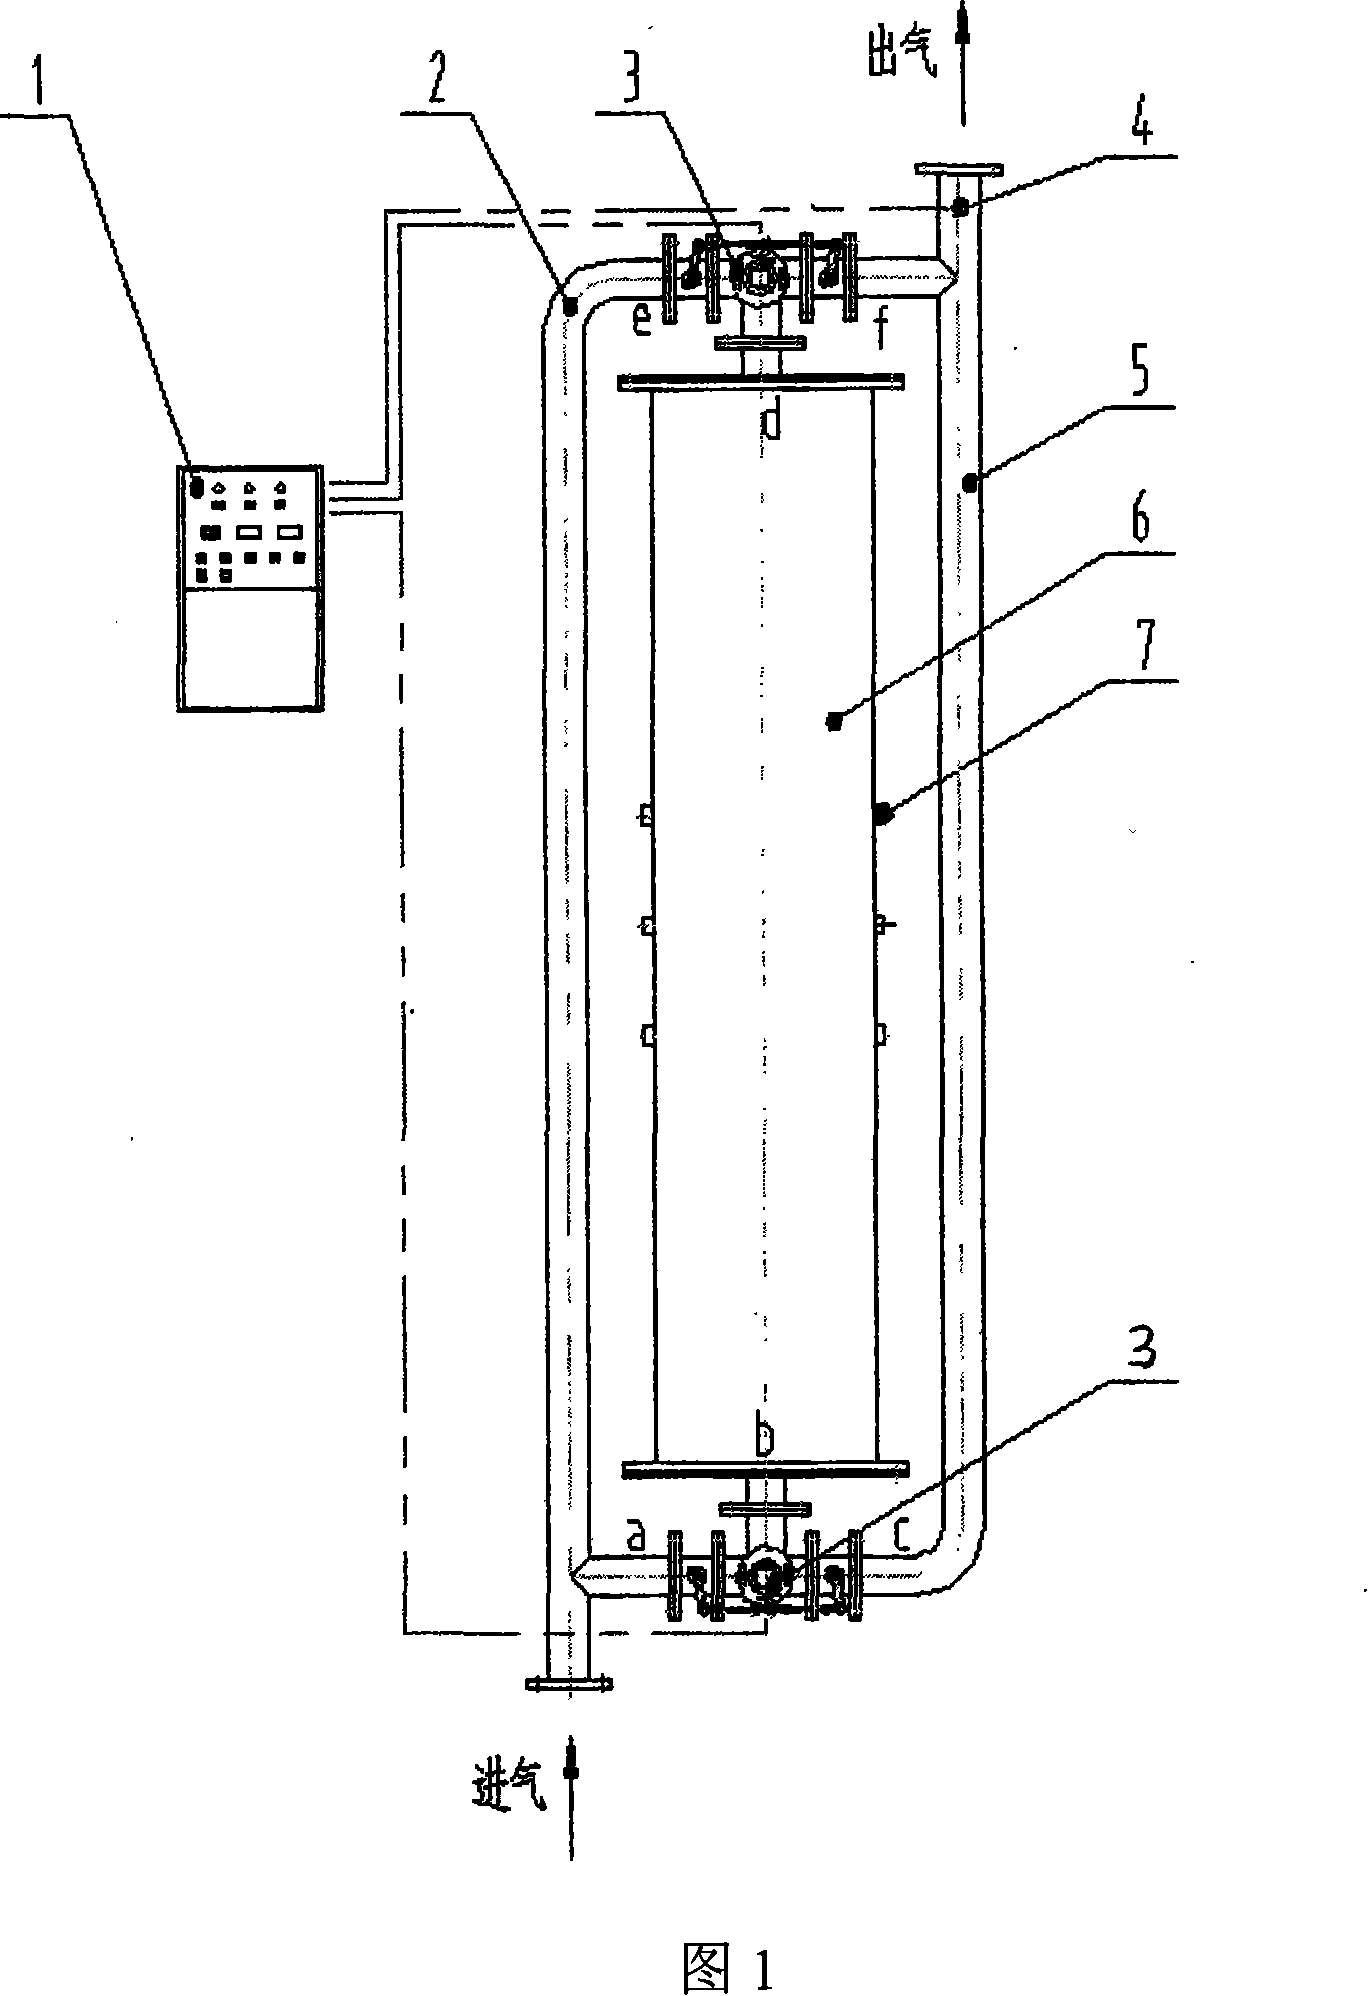 Method and apparatus for pyrolysis of biomass gas tar oil